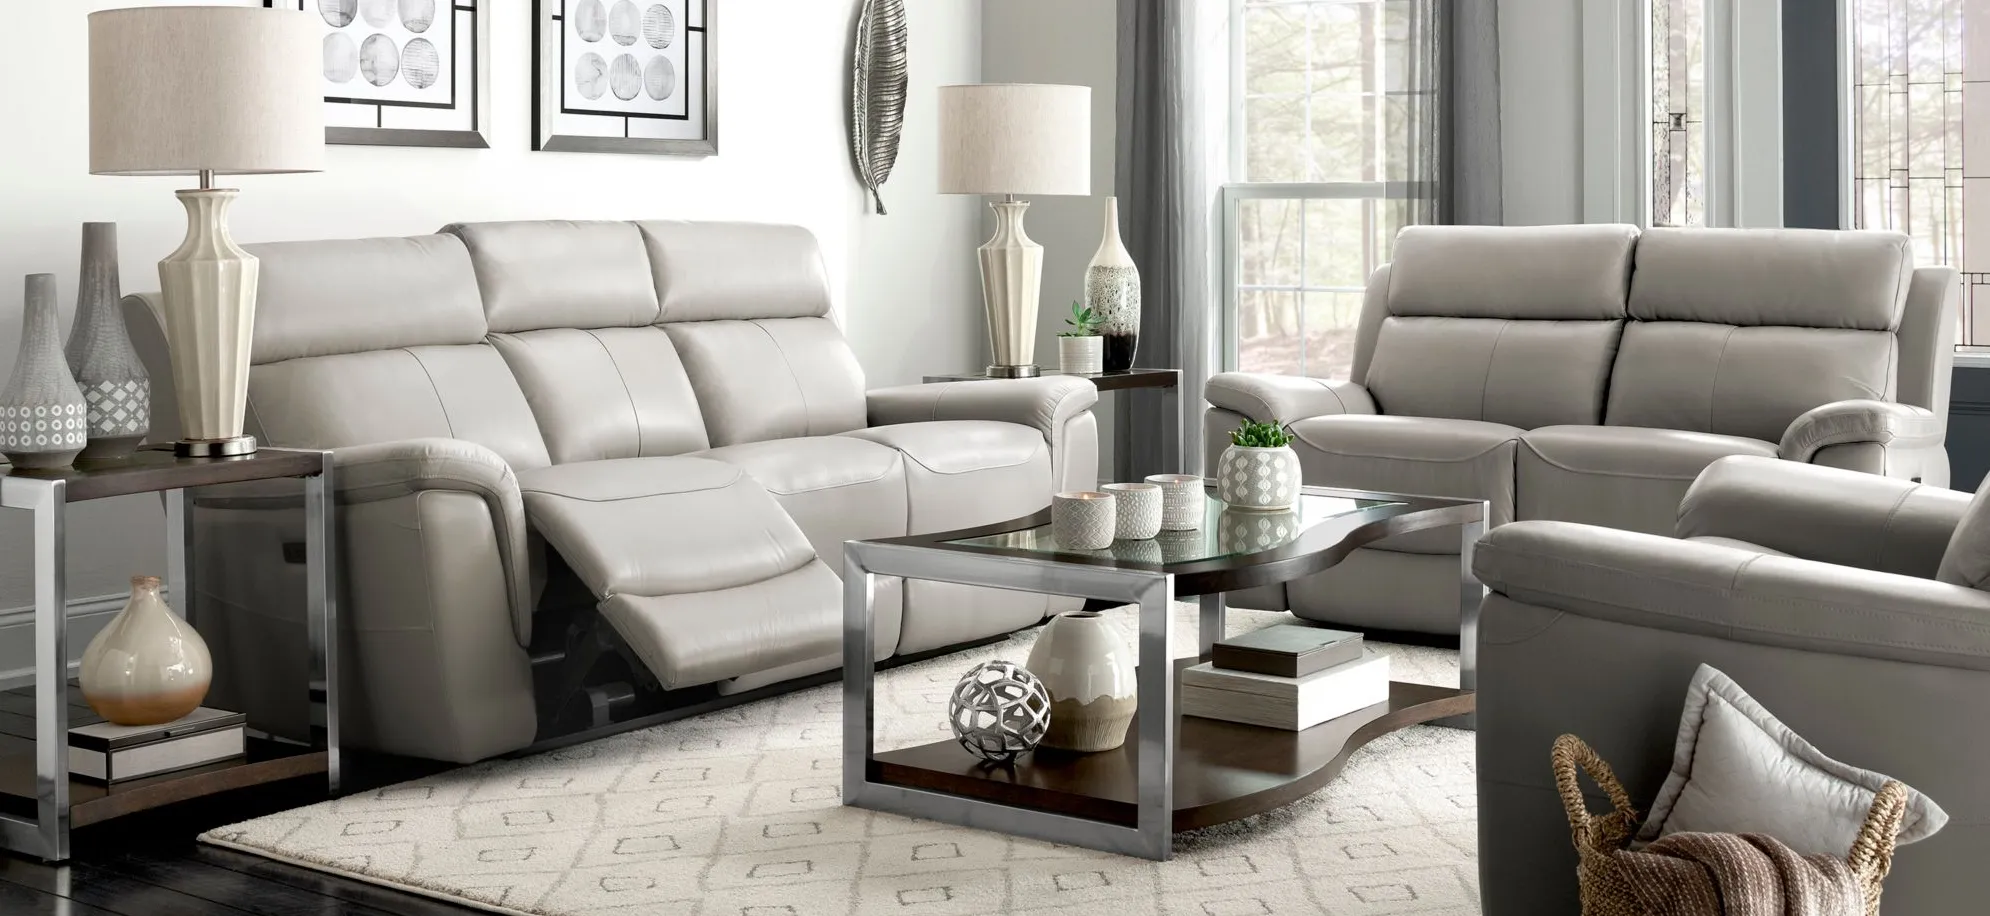 Dryden 2-pc. Leather Power Sofa and Loveseat Set in Gray by Bellanest